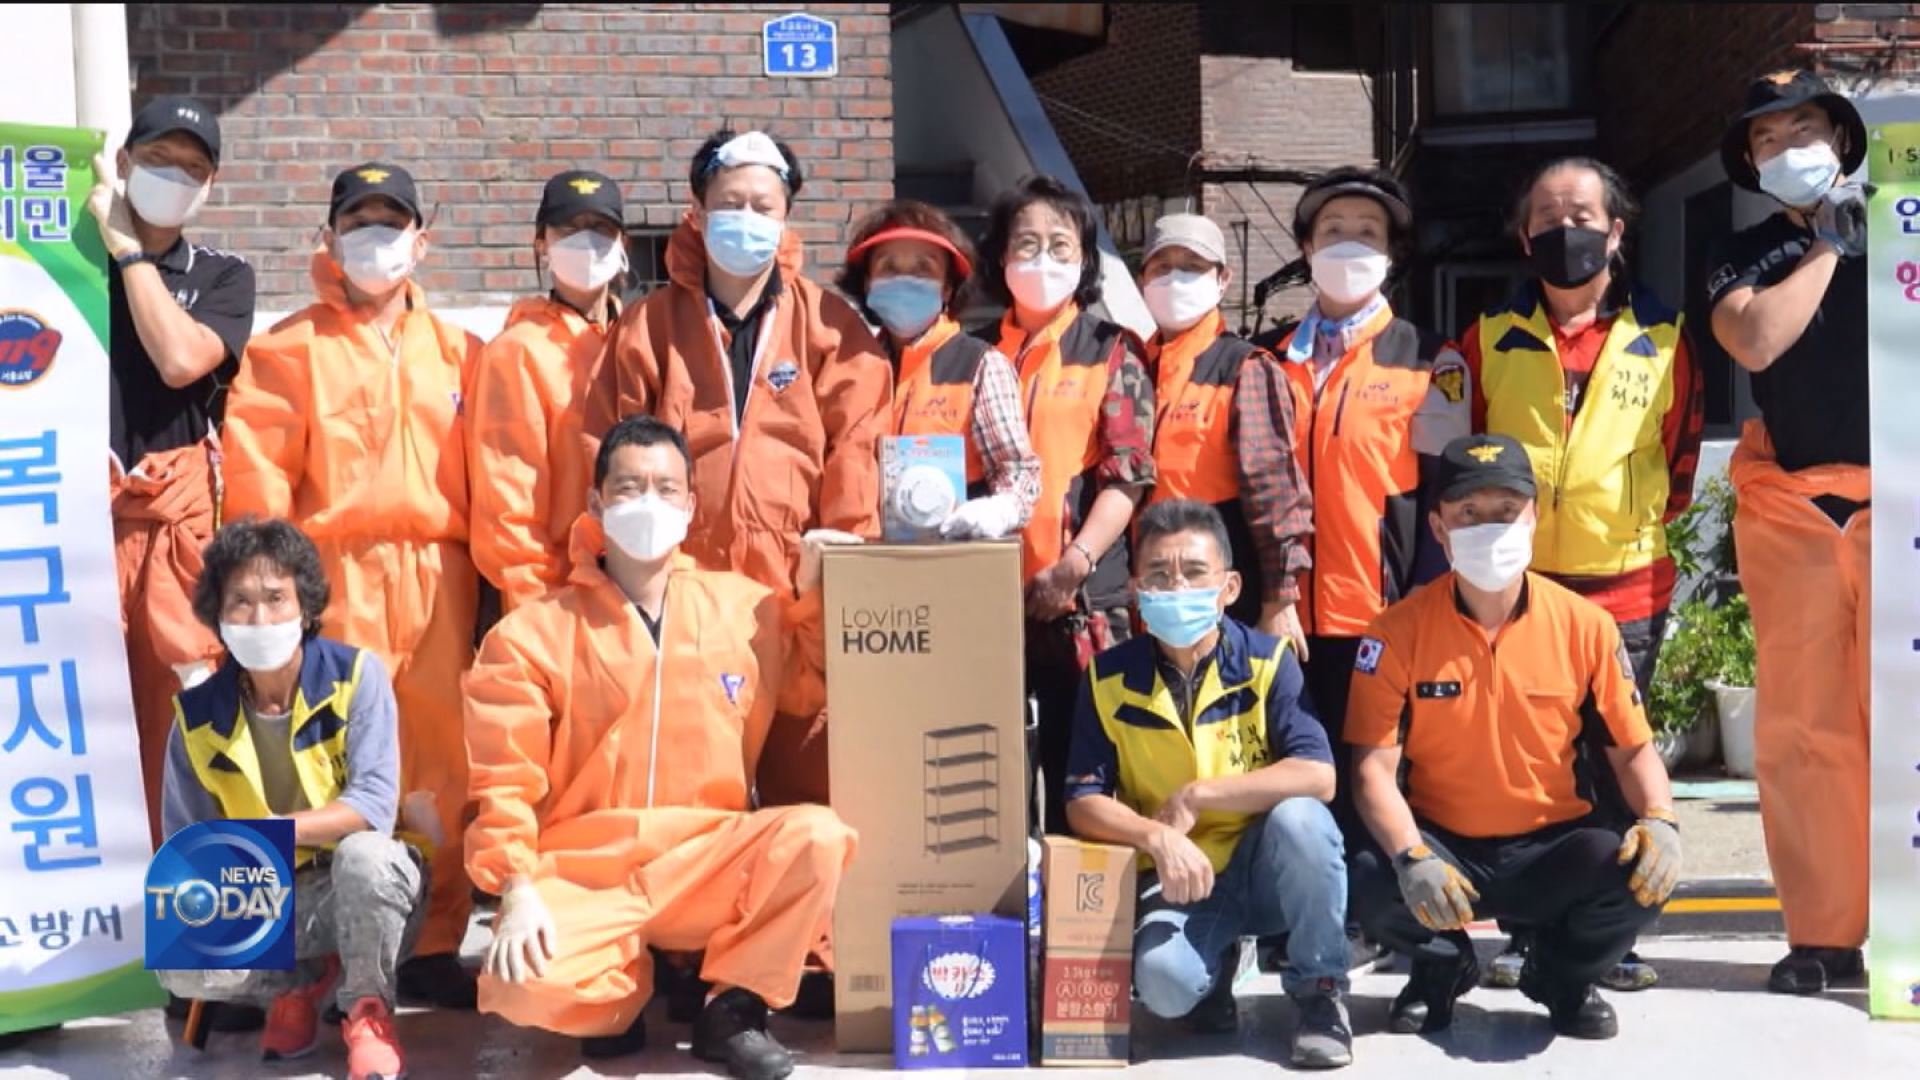 SEOUL FIREFIGHTERS LEND A HELPING HAND